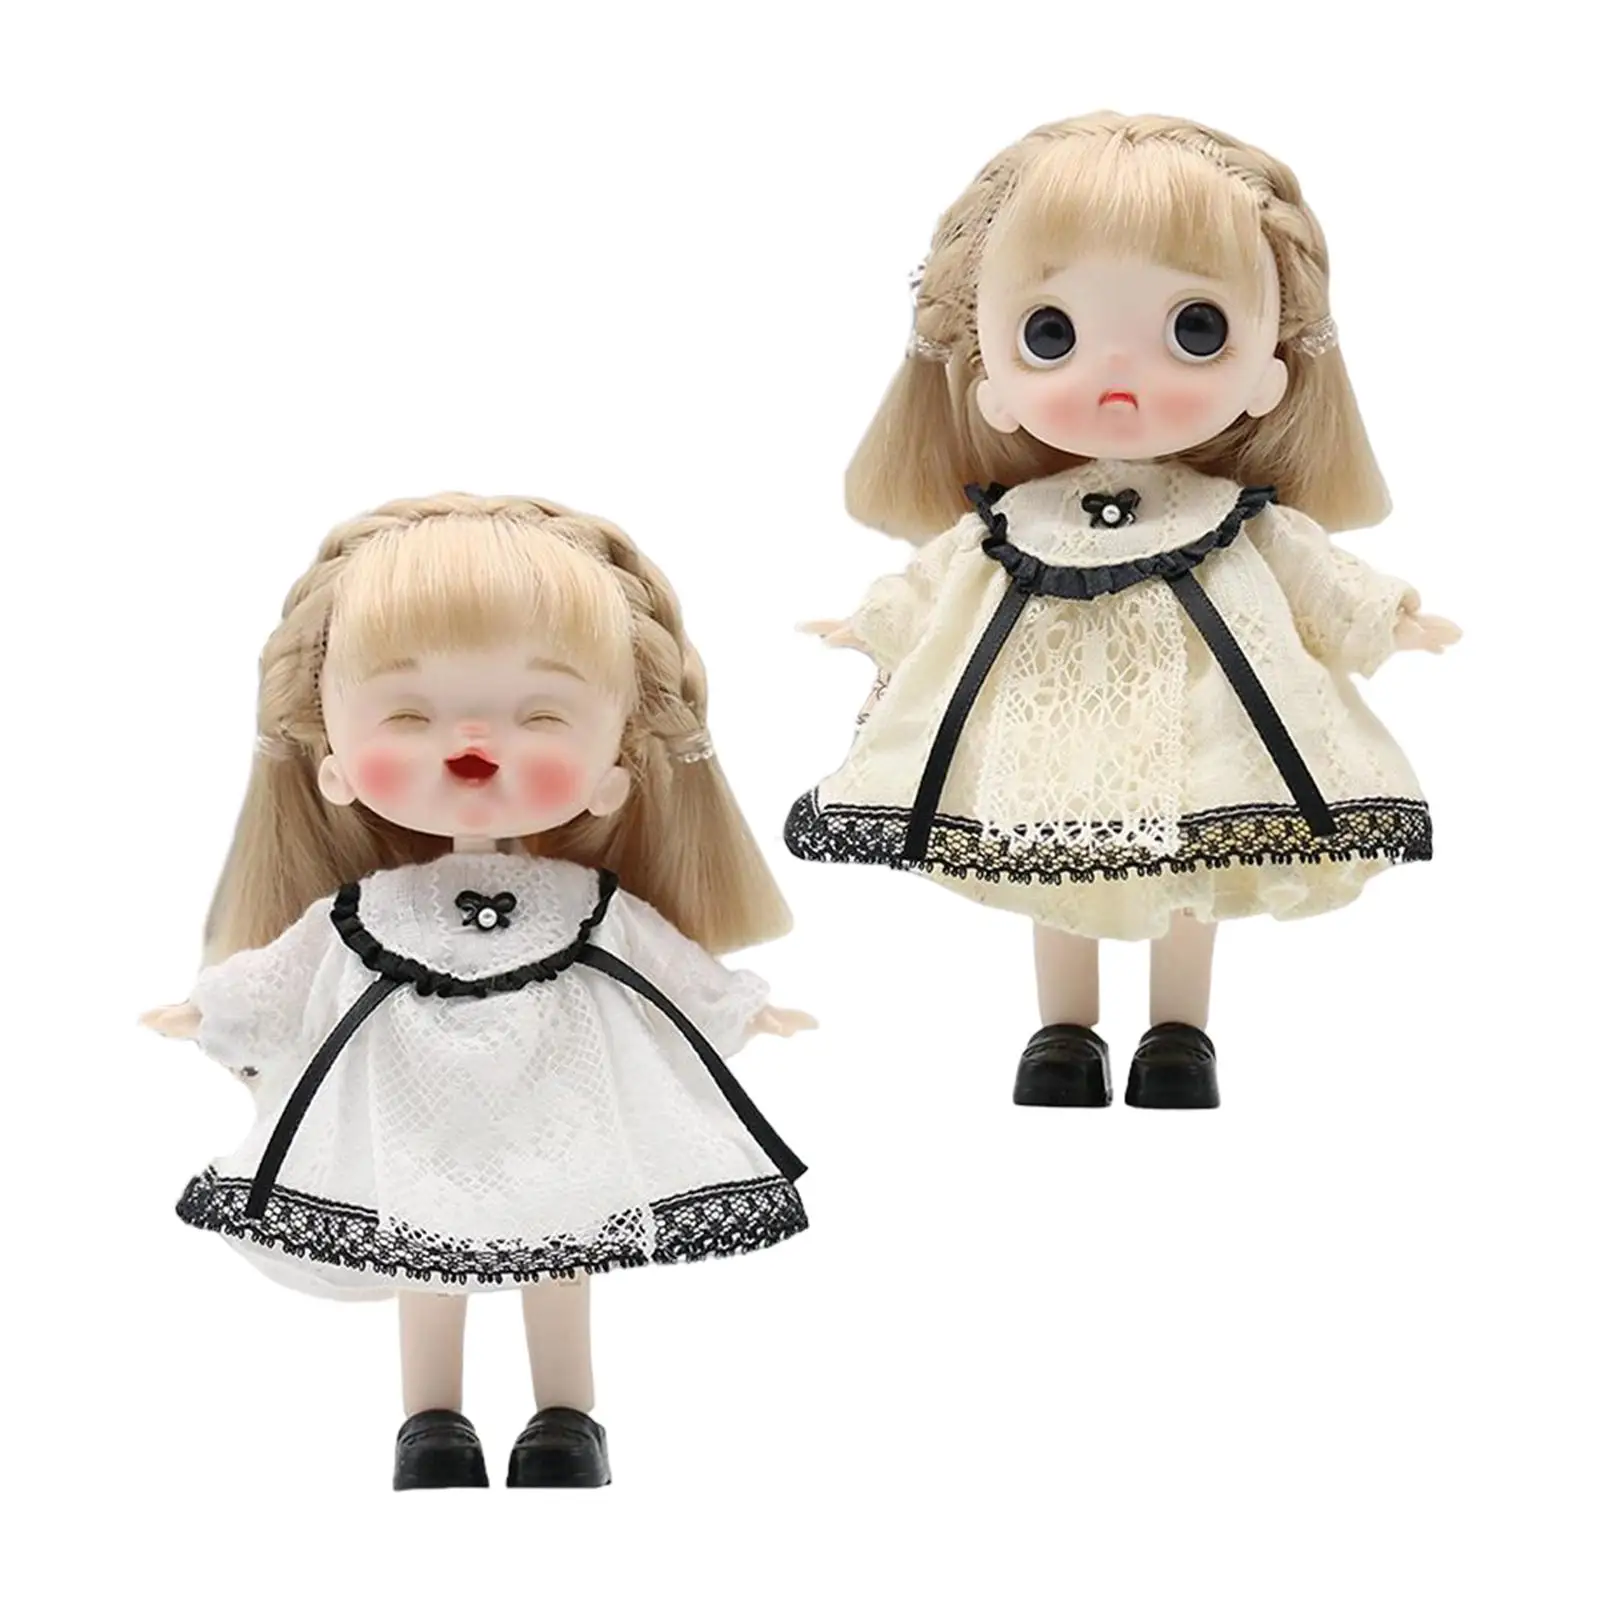 Mini Ball Jointed Baby Doll Dress up Accessories,Kids Girls Toys,Bendable makeup Doll for Birthday Graduation Valentine Gifts